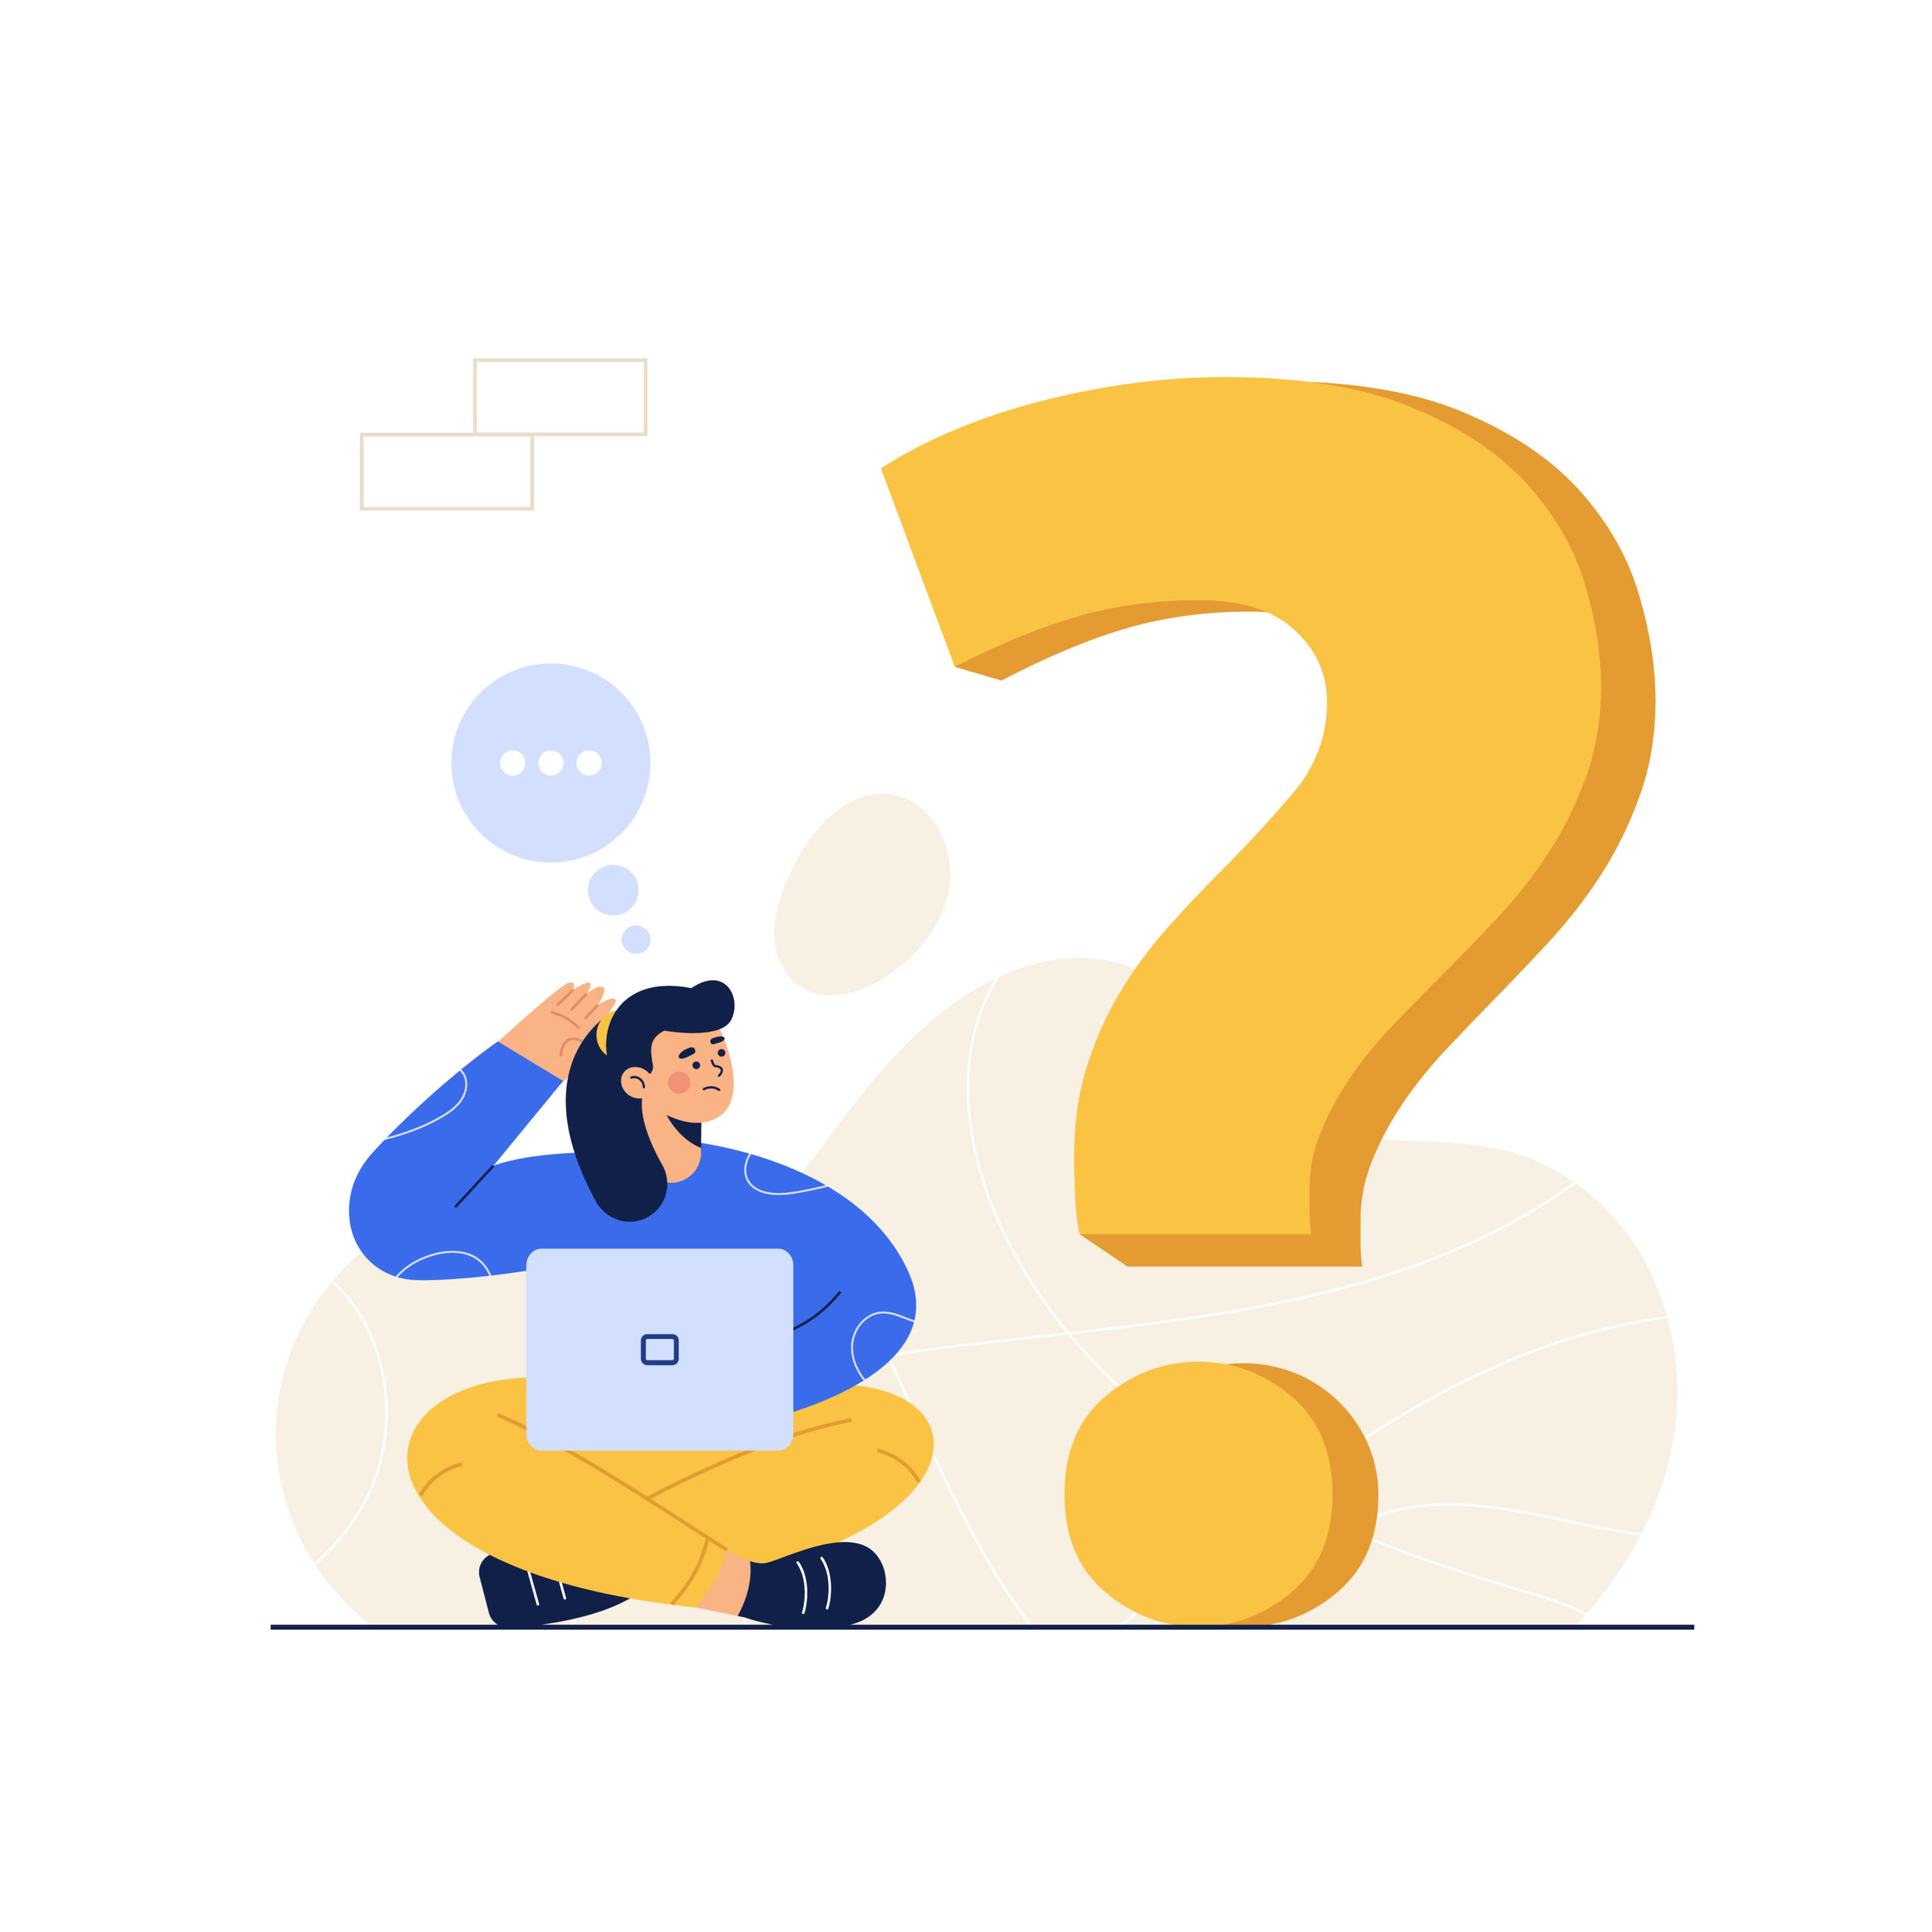 Cartoon Style. I Have No Idea, I Have Questions, I Can Find Answers From The Search Engine. The Internet Has All The Answers. Flat Illustration Vector Design